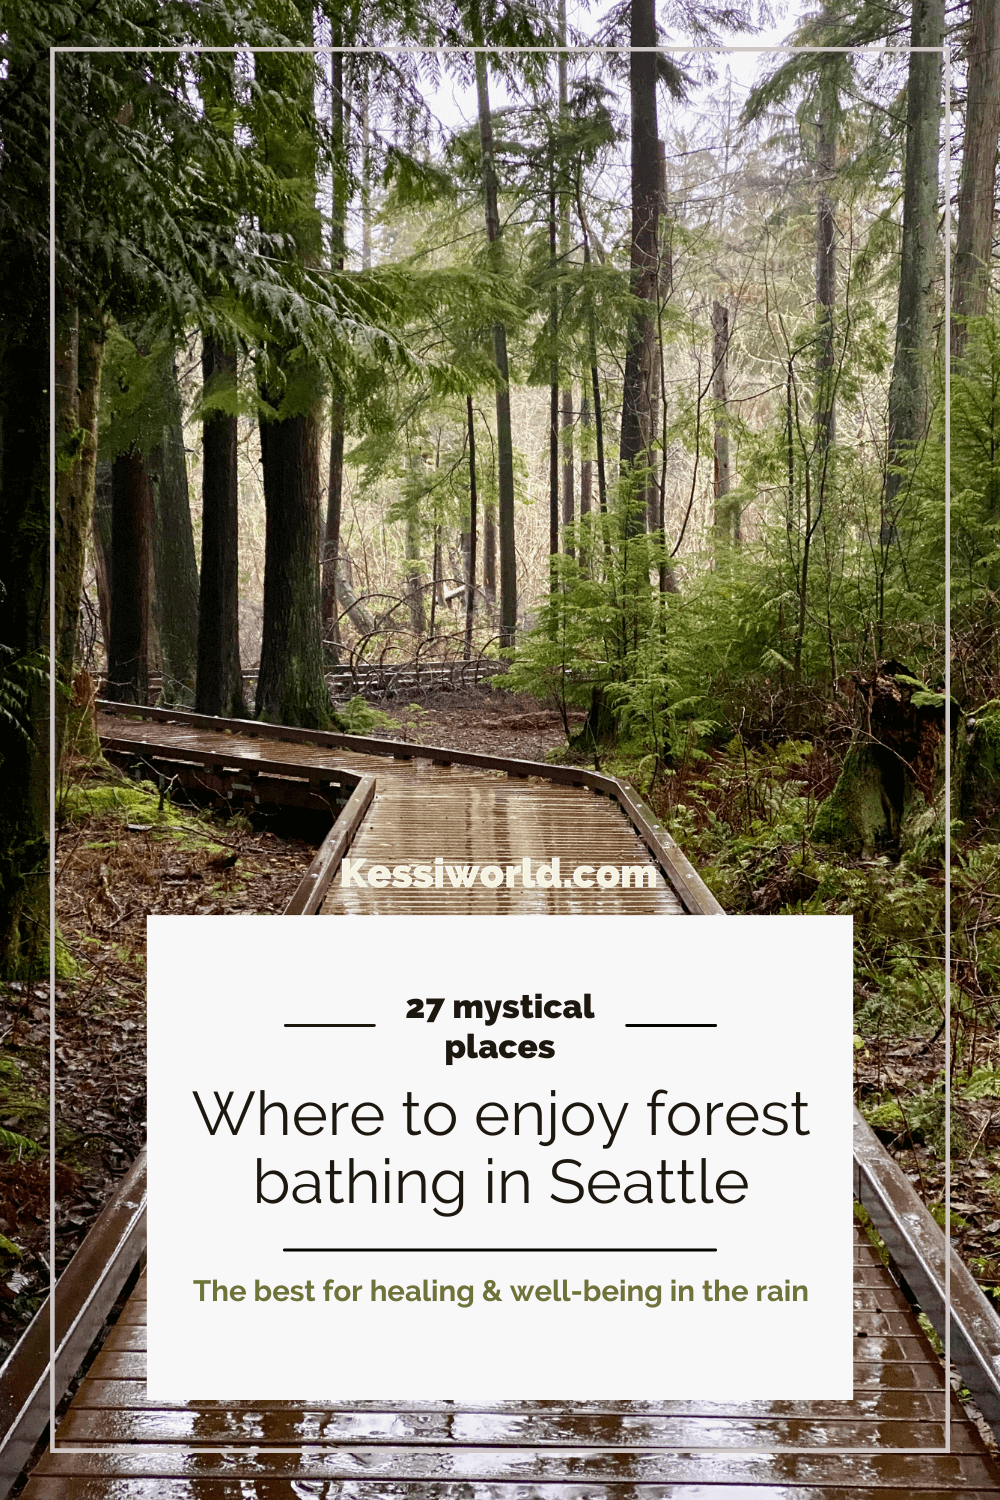 A pinterest pin about Forest Bathing in Seattle. The text is over a boardwalk that glistens with fresh rain. There are young adult trees in the background.